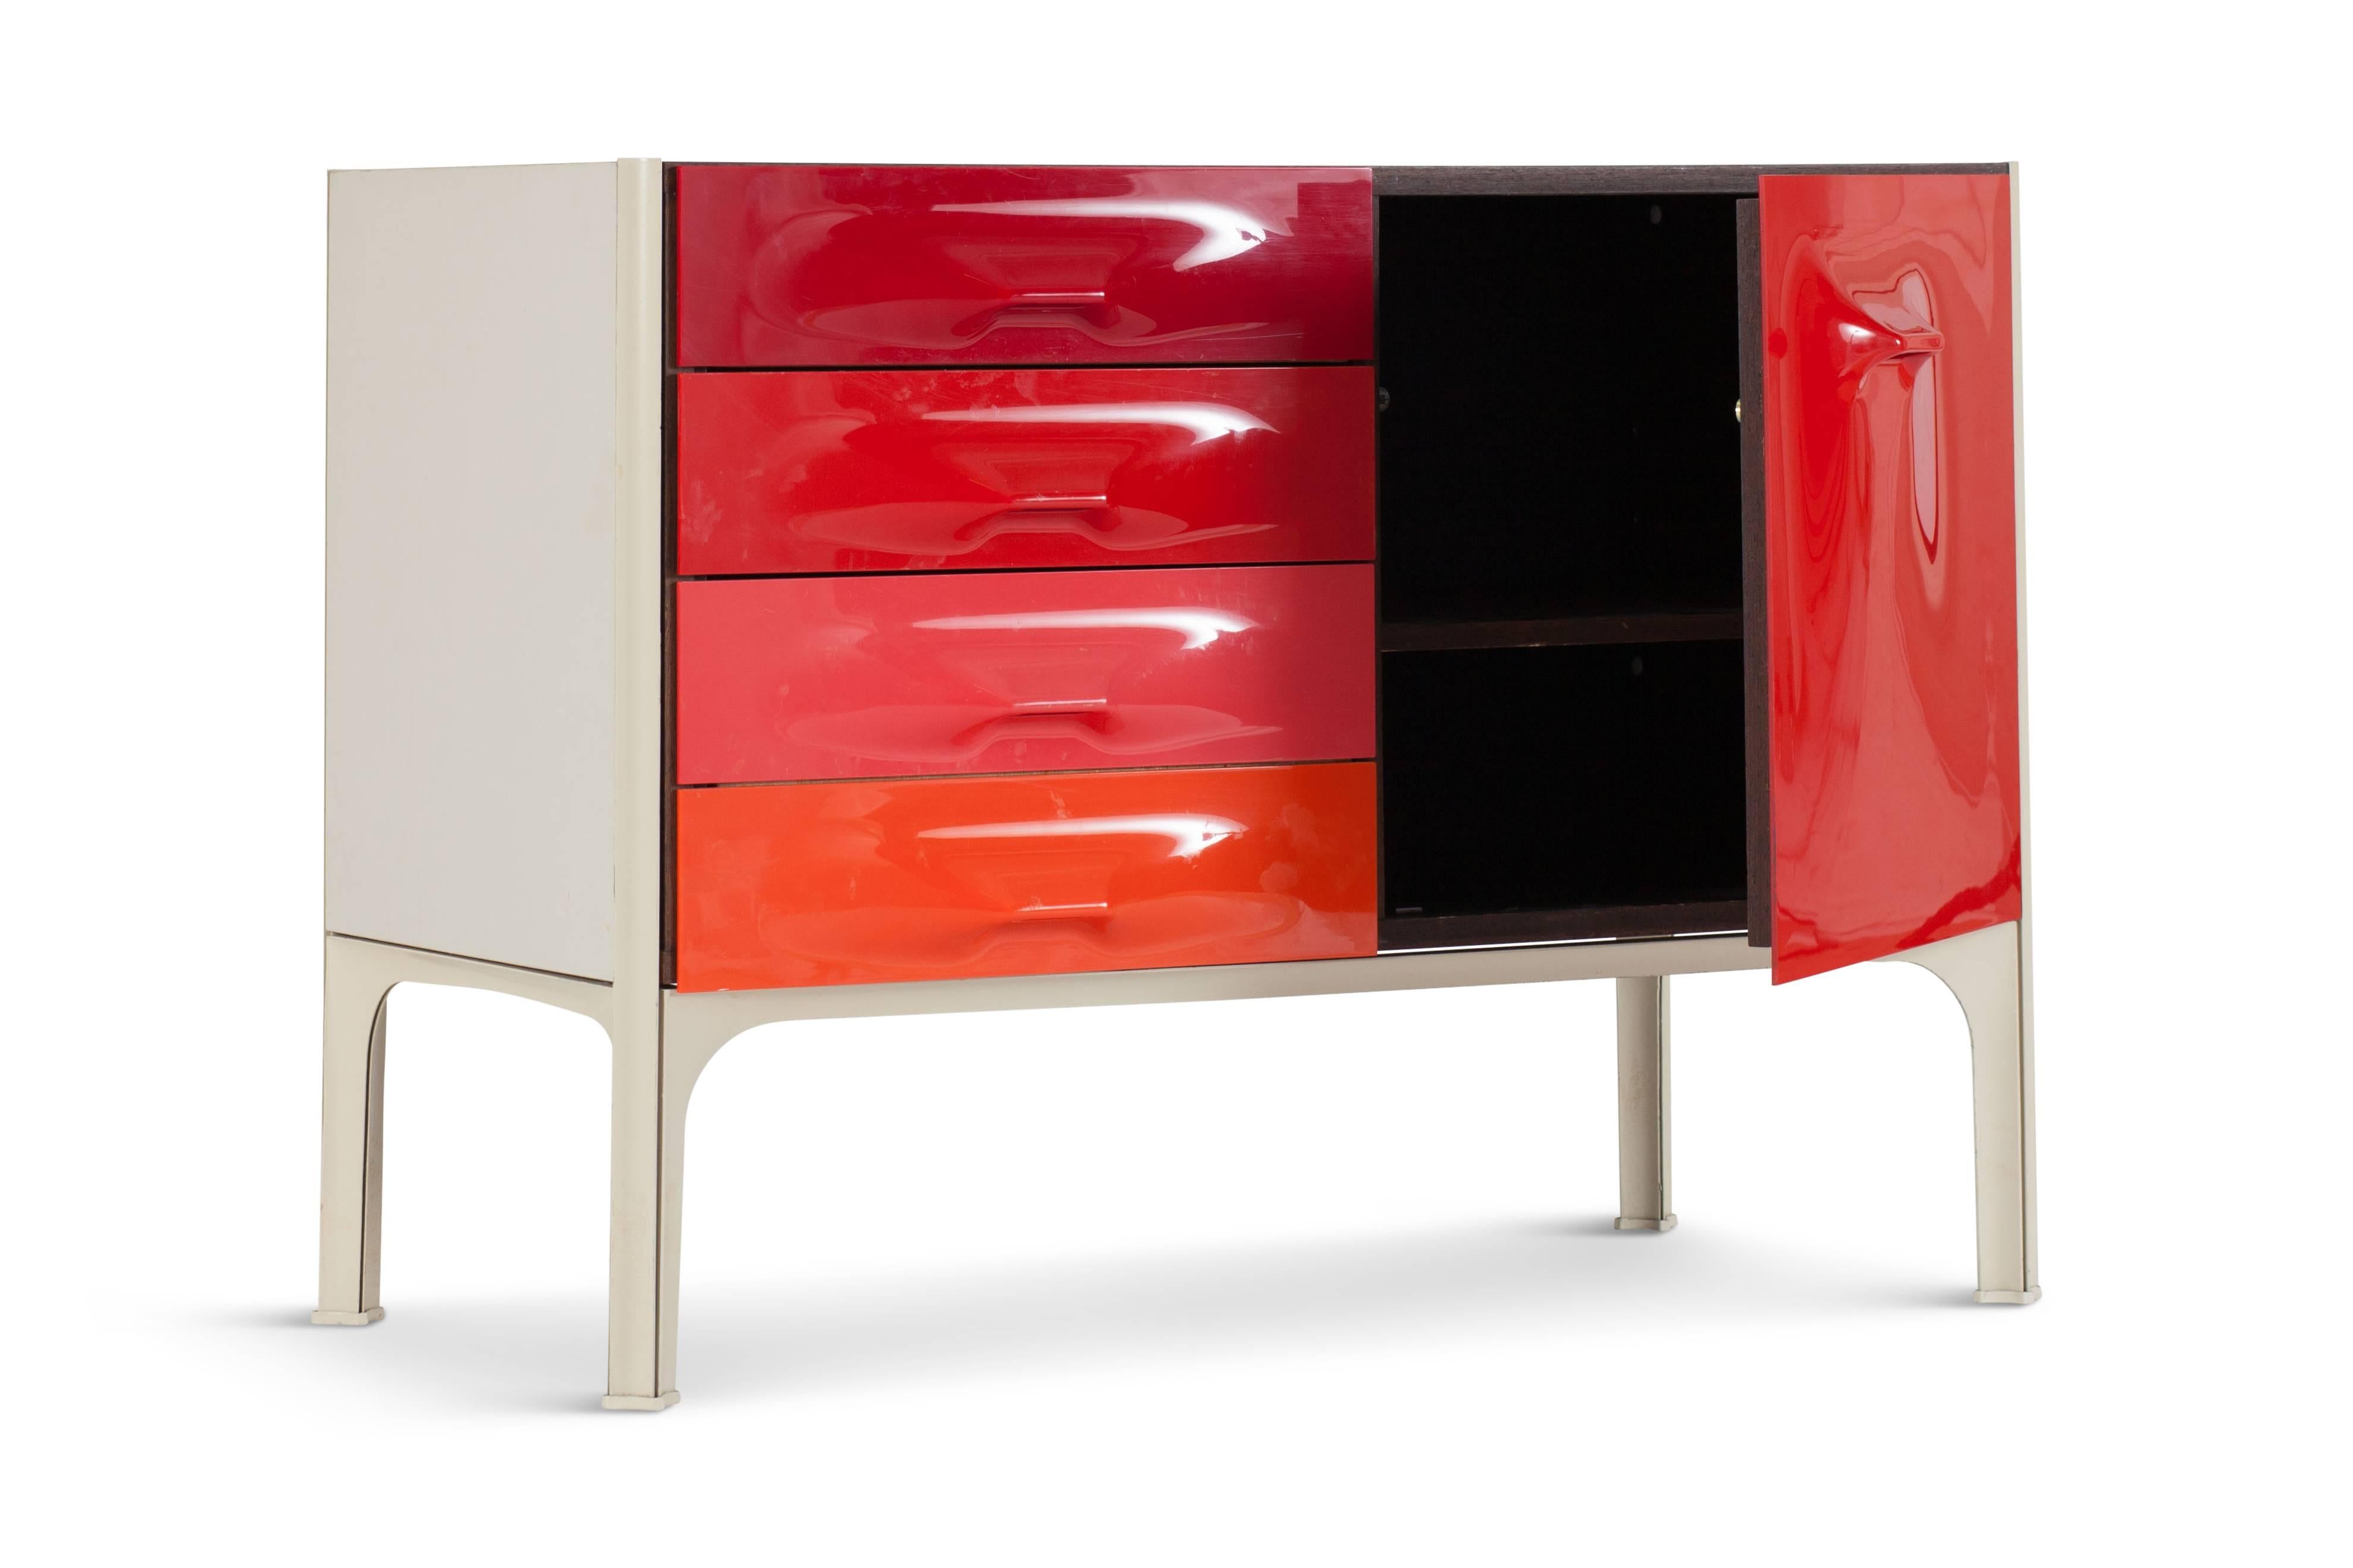 Colourful midcentury sideboard by Raymond Loewy for Doubinsky Frères, France, 1970s


The Cabinet is provided with three drawers: two singel, one double and shelving. The handles are organically shaped, with a smooth transition to the rest of the